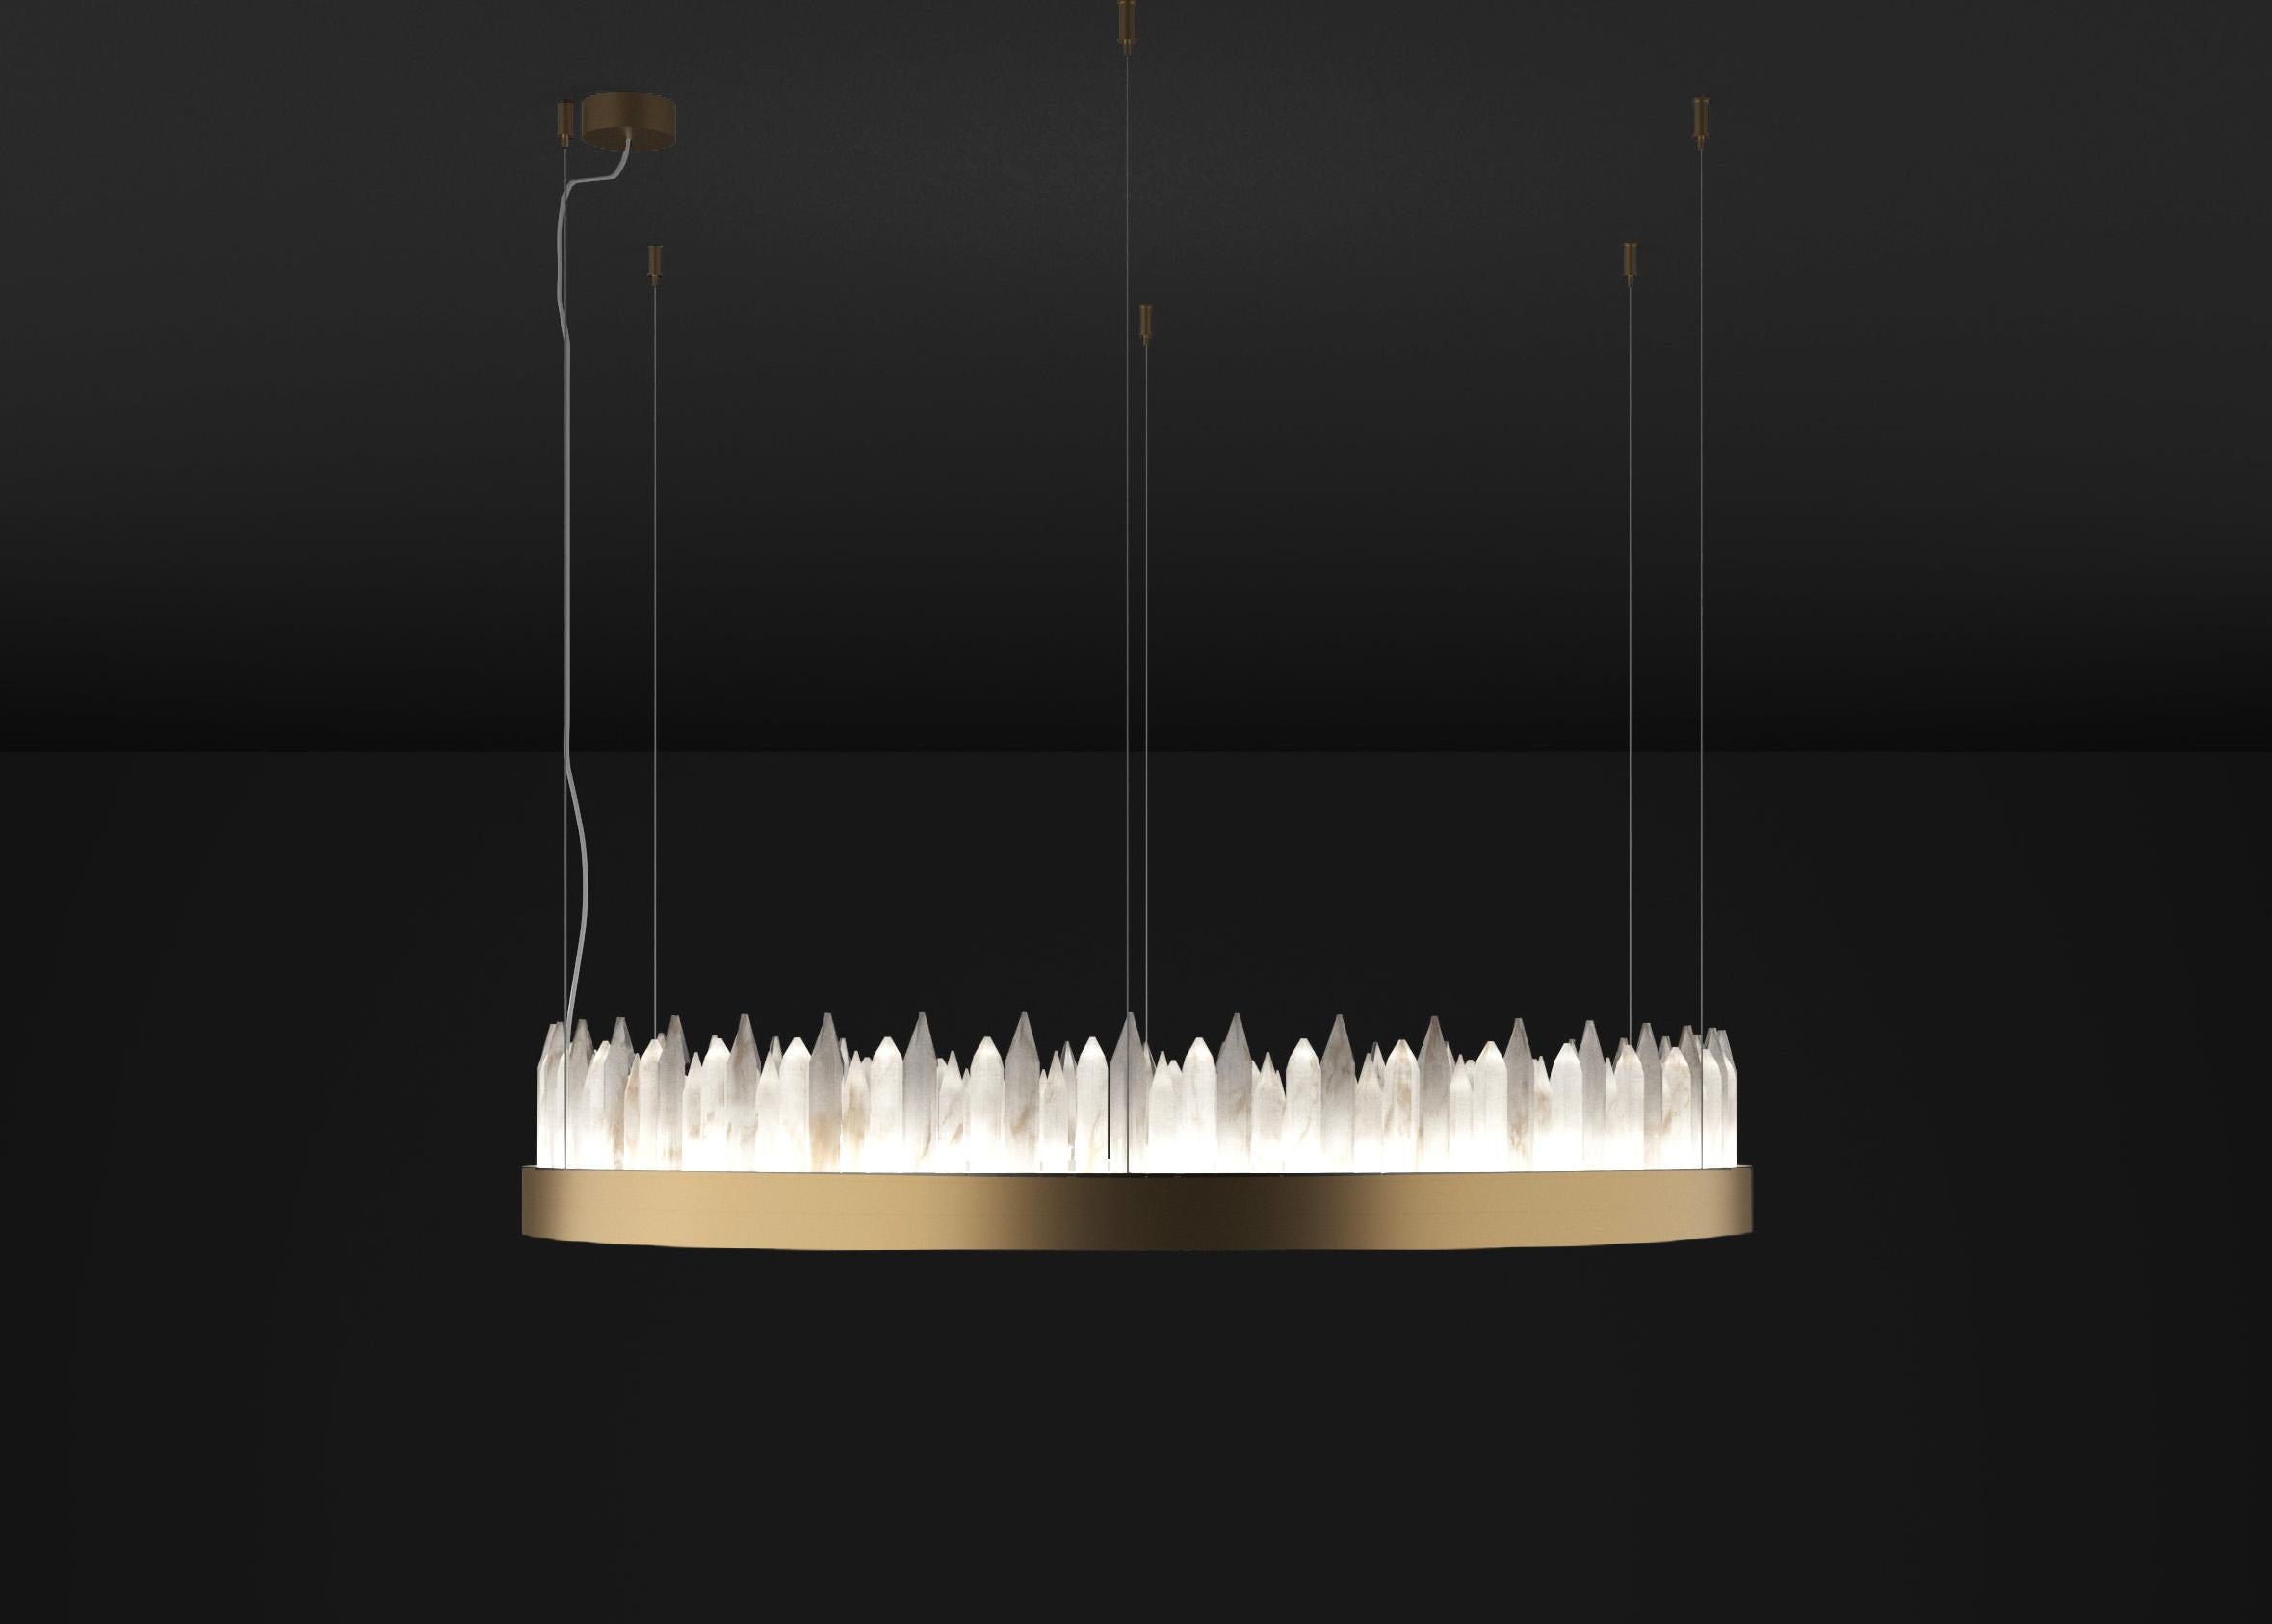 Urano Bronze 60 Pendant Light 3 by Alabastro Italiano
Dimensions: Ø 60 x H 20 cm.
Materials: Glass and bronze.

2 Strip LED, 81 Watt, 8121 Lumen, 24 V, 3000 K, Wiring CE.

Available in different sizes: Ø 60, Ø 80, Ø 100 and Ø 120 cm. Available in